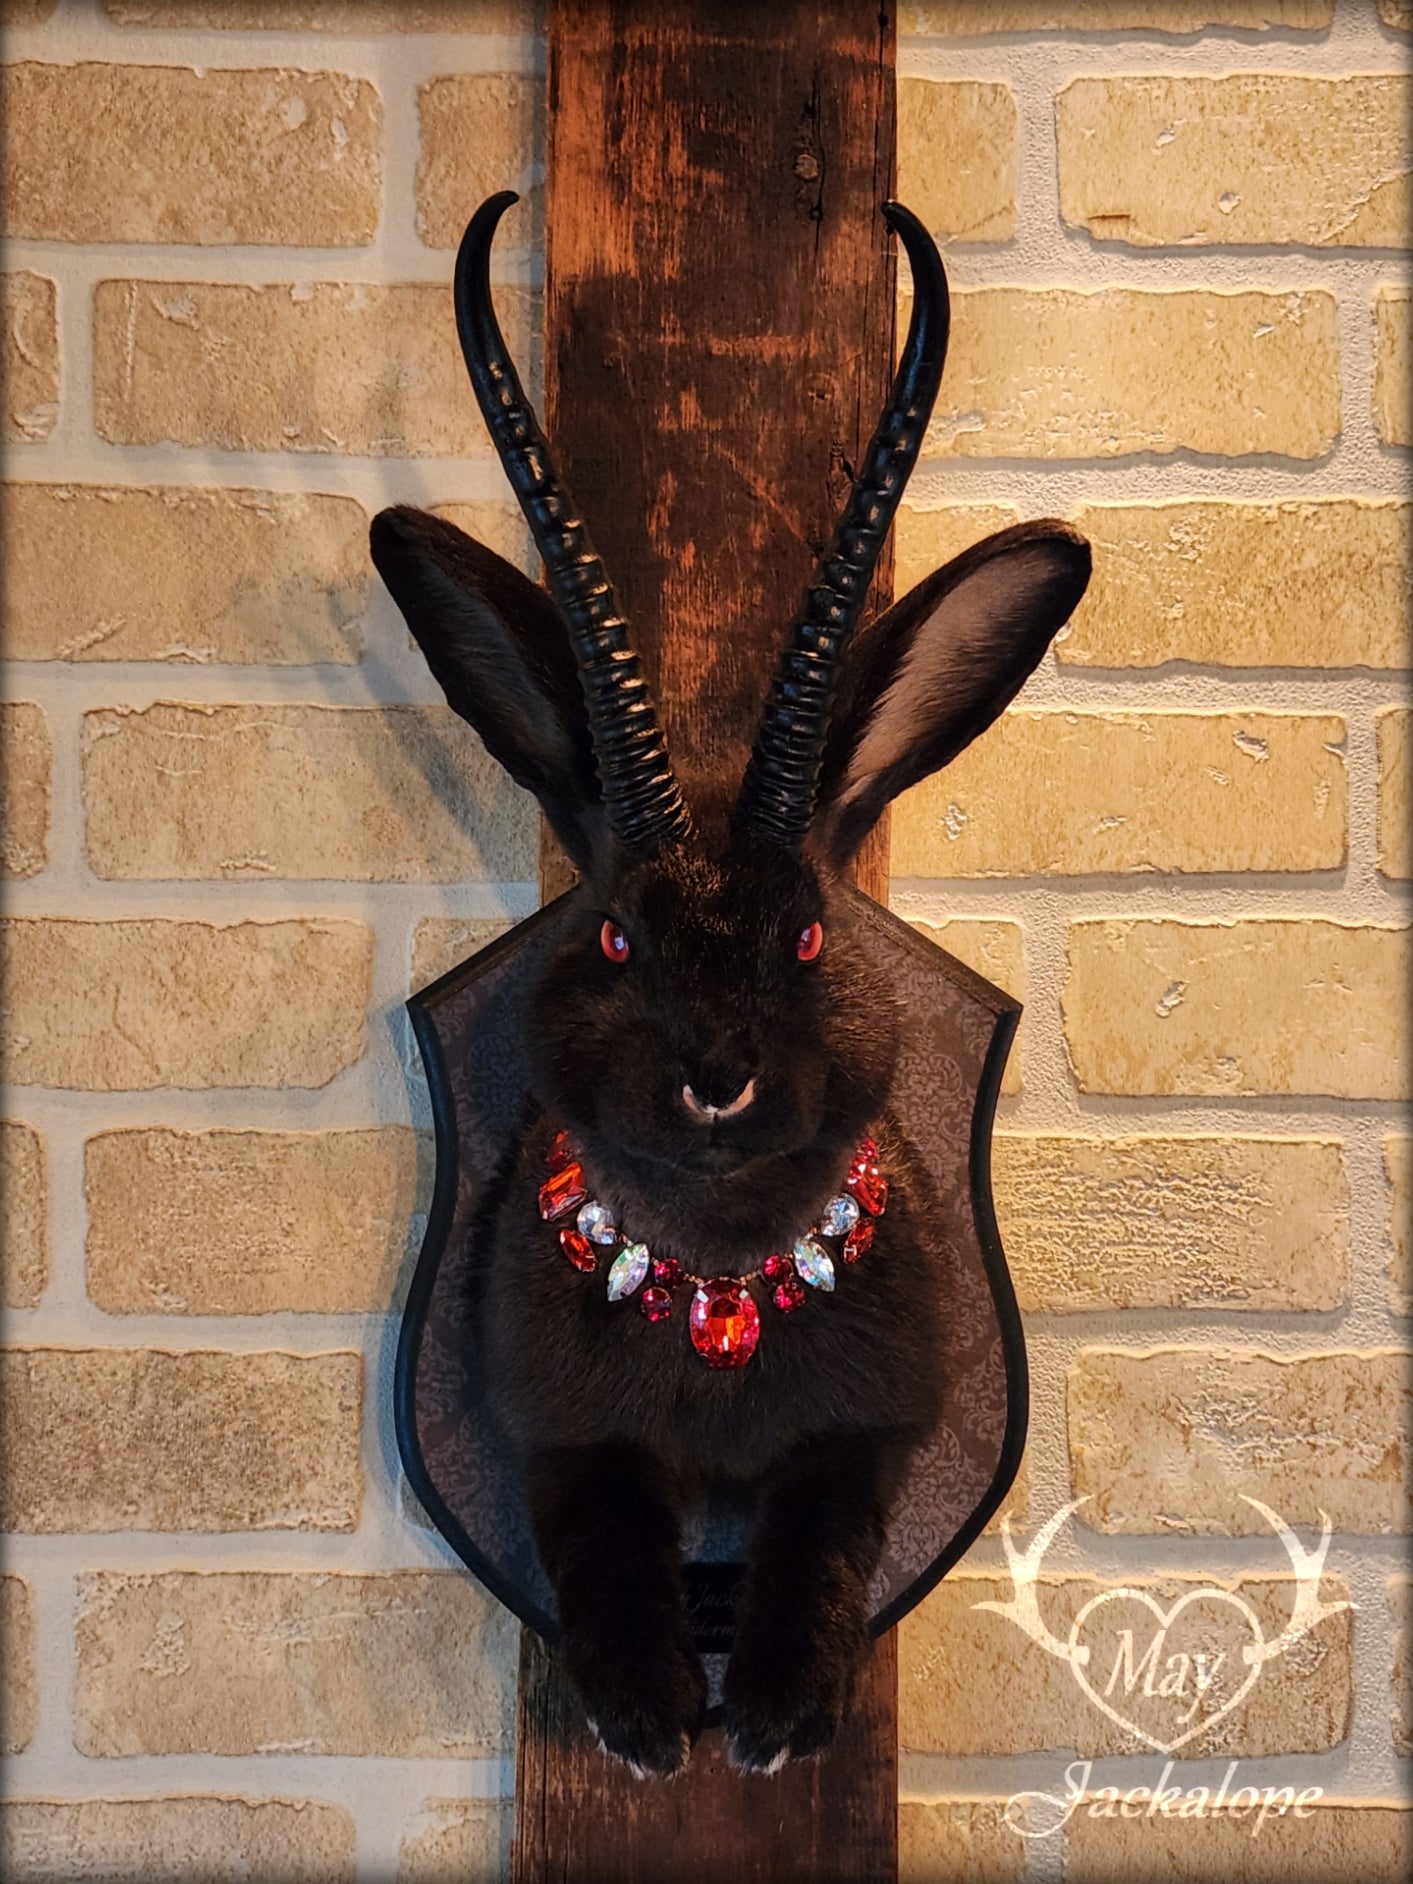 Black Jackalope taxidermy with red eyes, black horns replica & a necklace